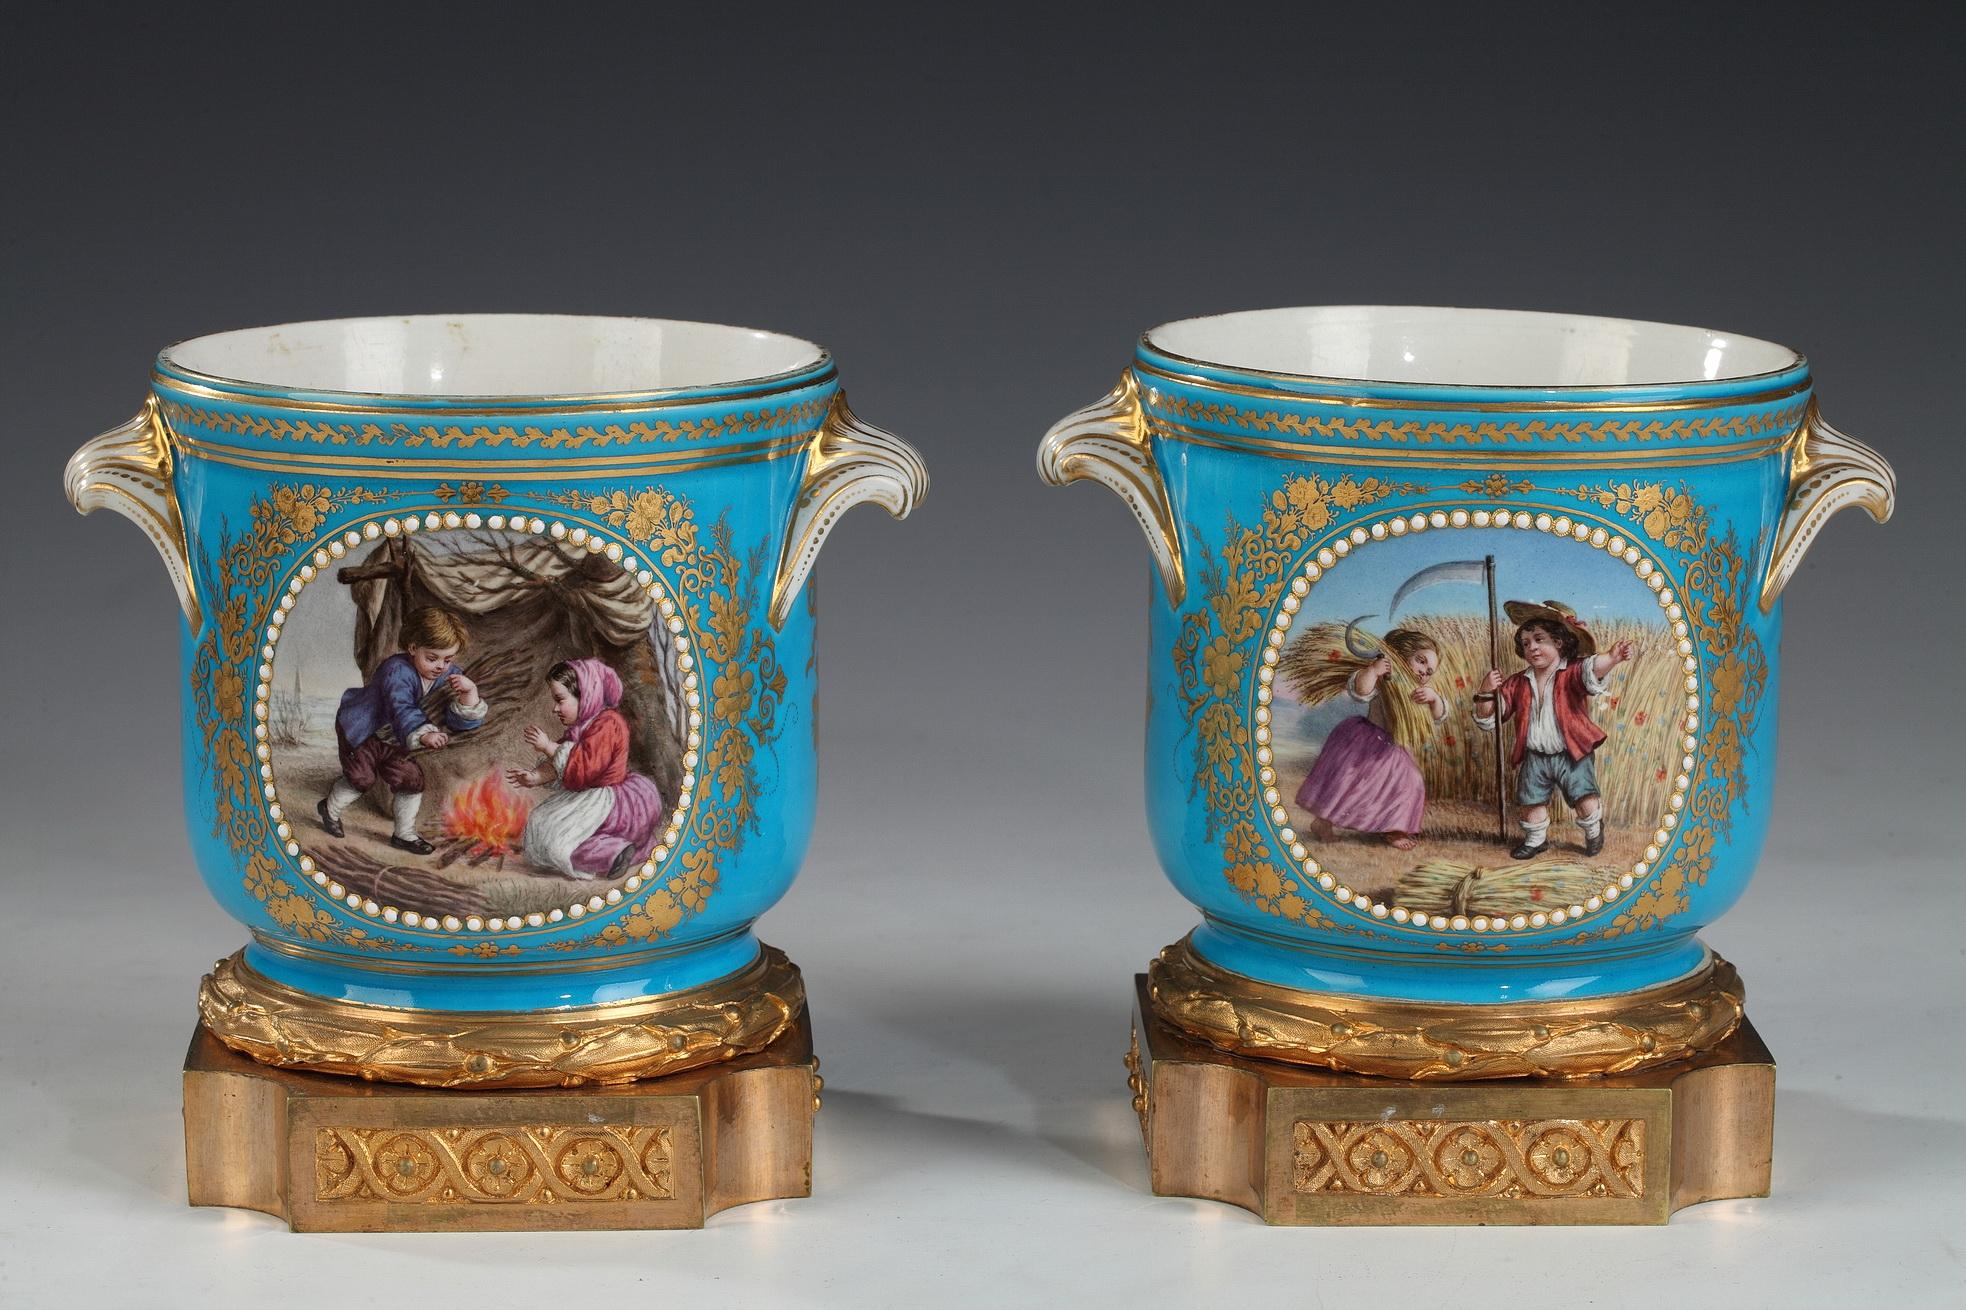 Pair of porcelain glass-coolers with painted medallions and gilded ornaments on a turquoise blue background, mounted on a gilt bronze base, in the style of the Manufacture of Sèvres. On the obverse are two painted scenes of childhood representing